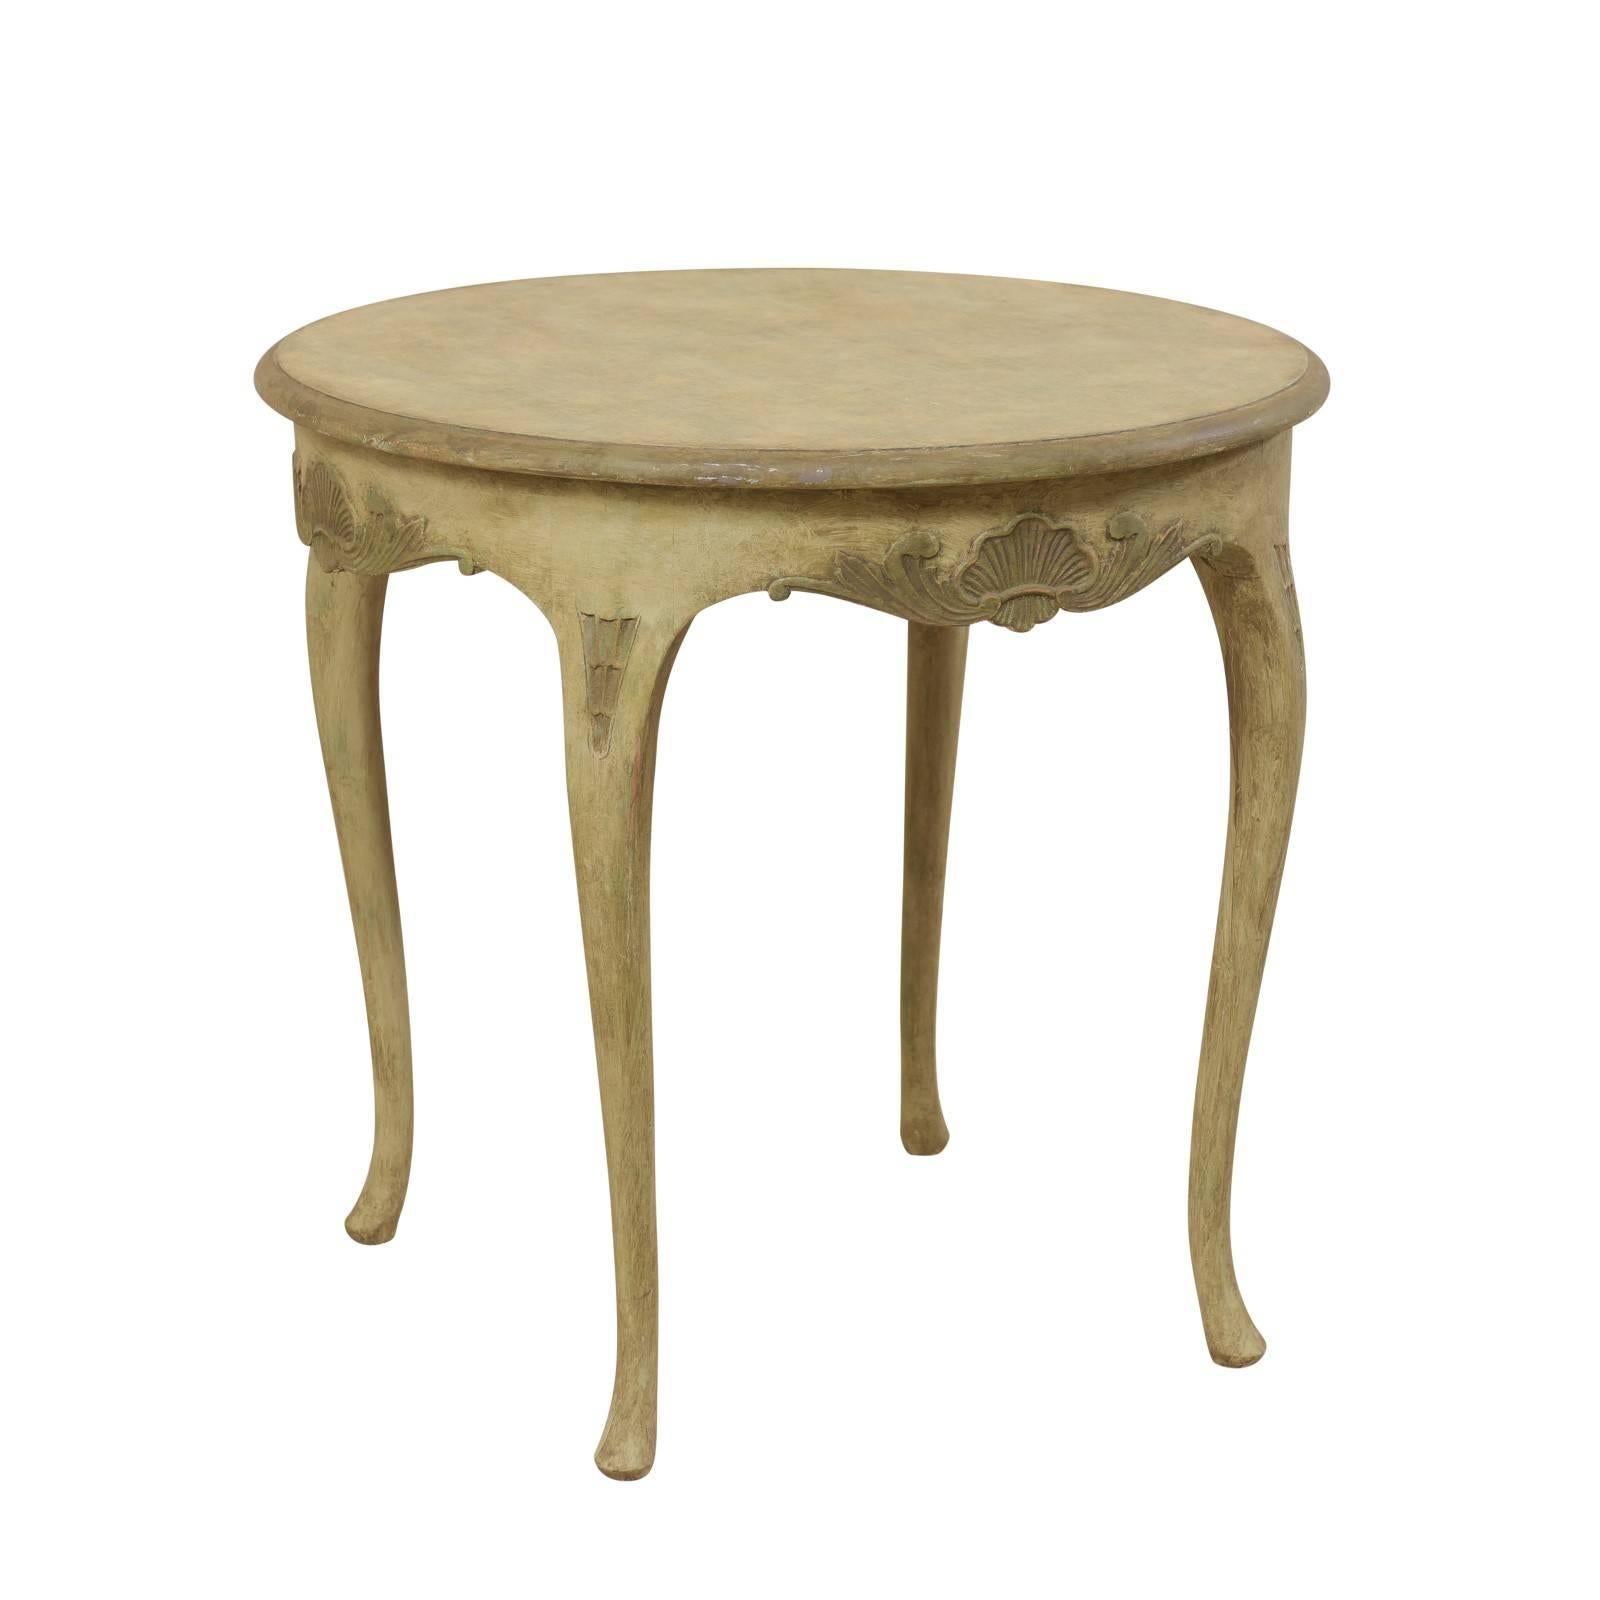 Rococo Style Swedish Round Painted Wood Occasional Table with Seashell Motifs